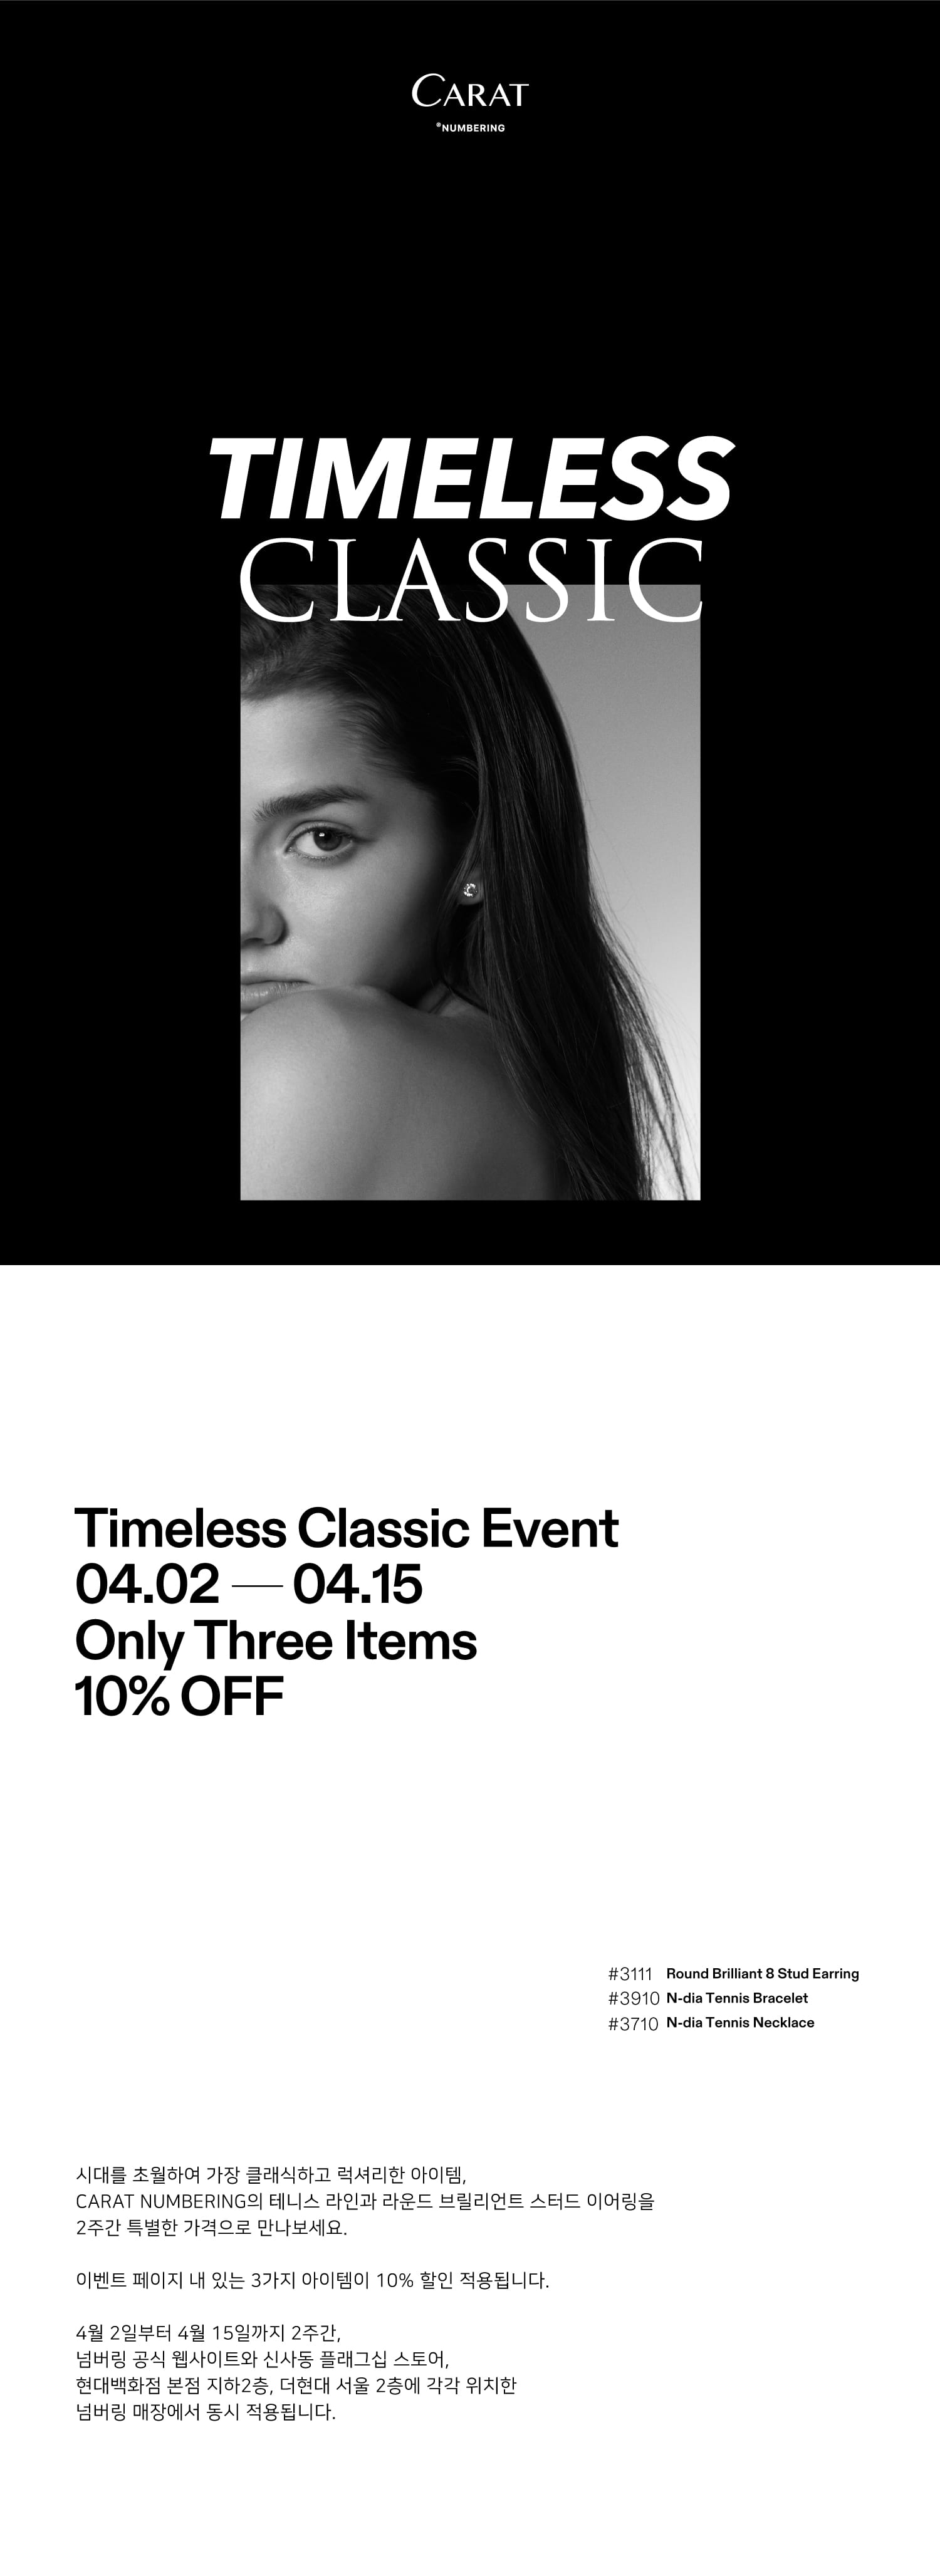 TimelessClassic event